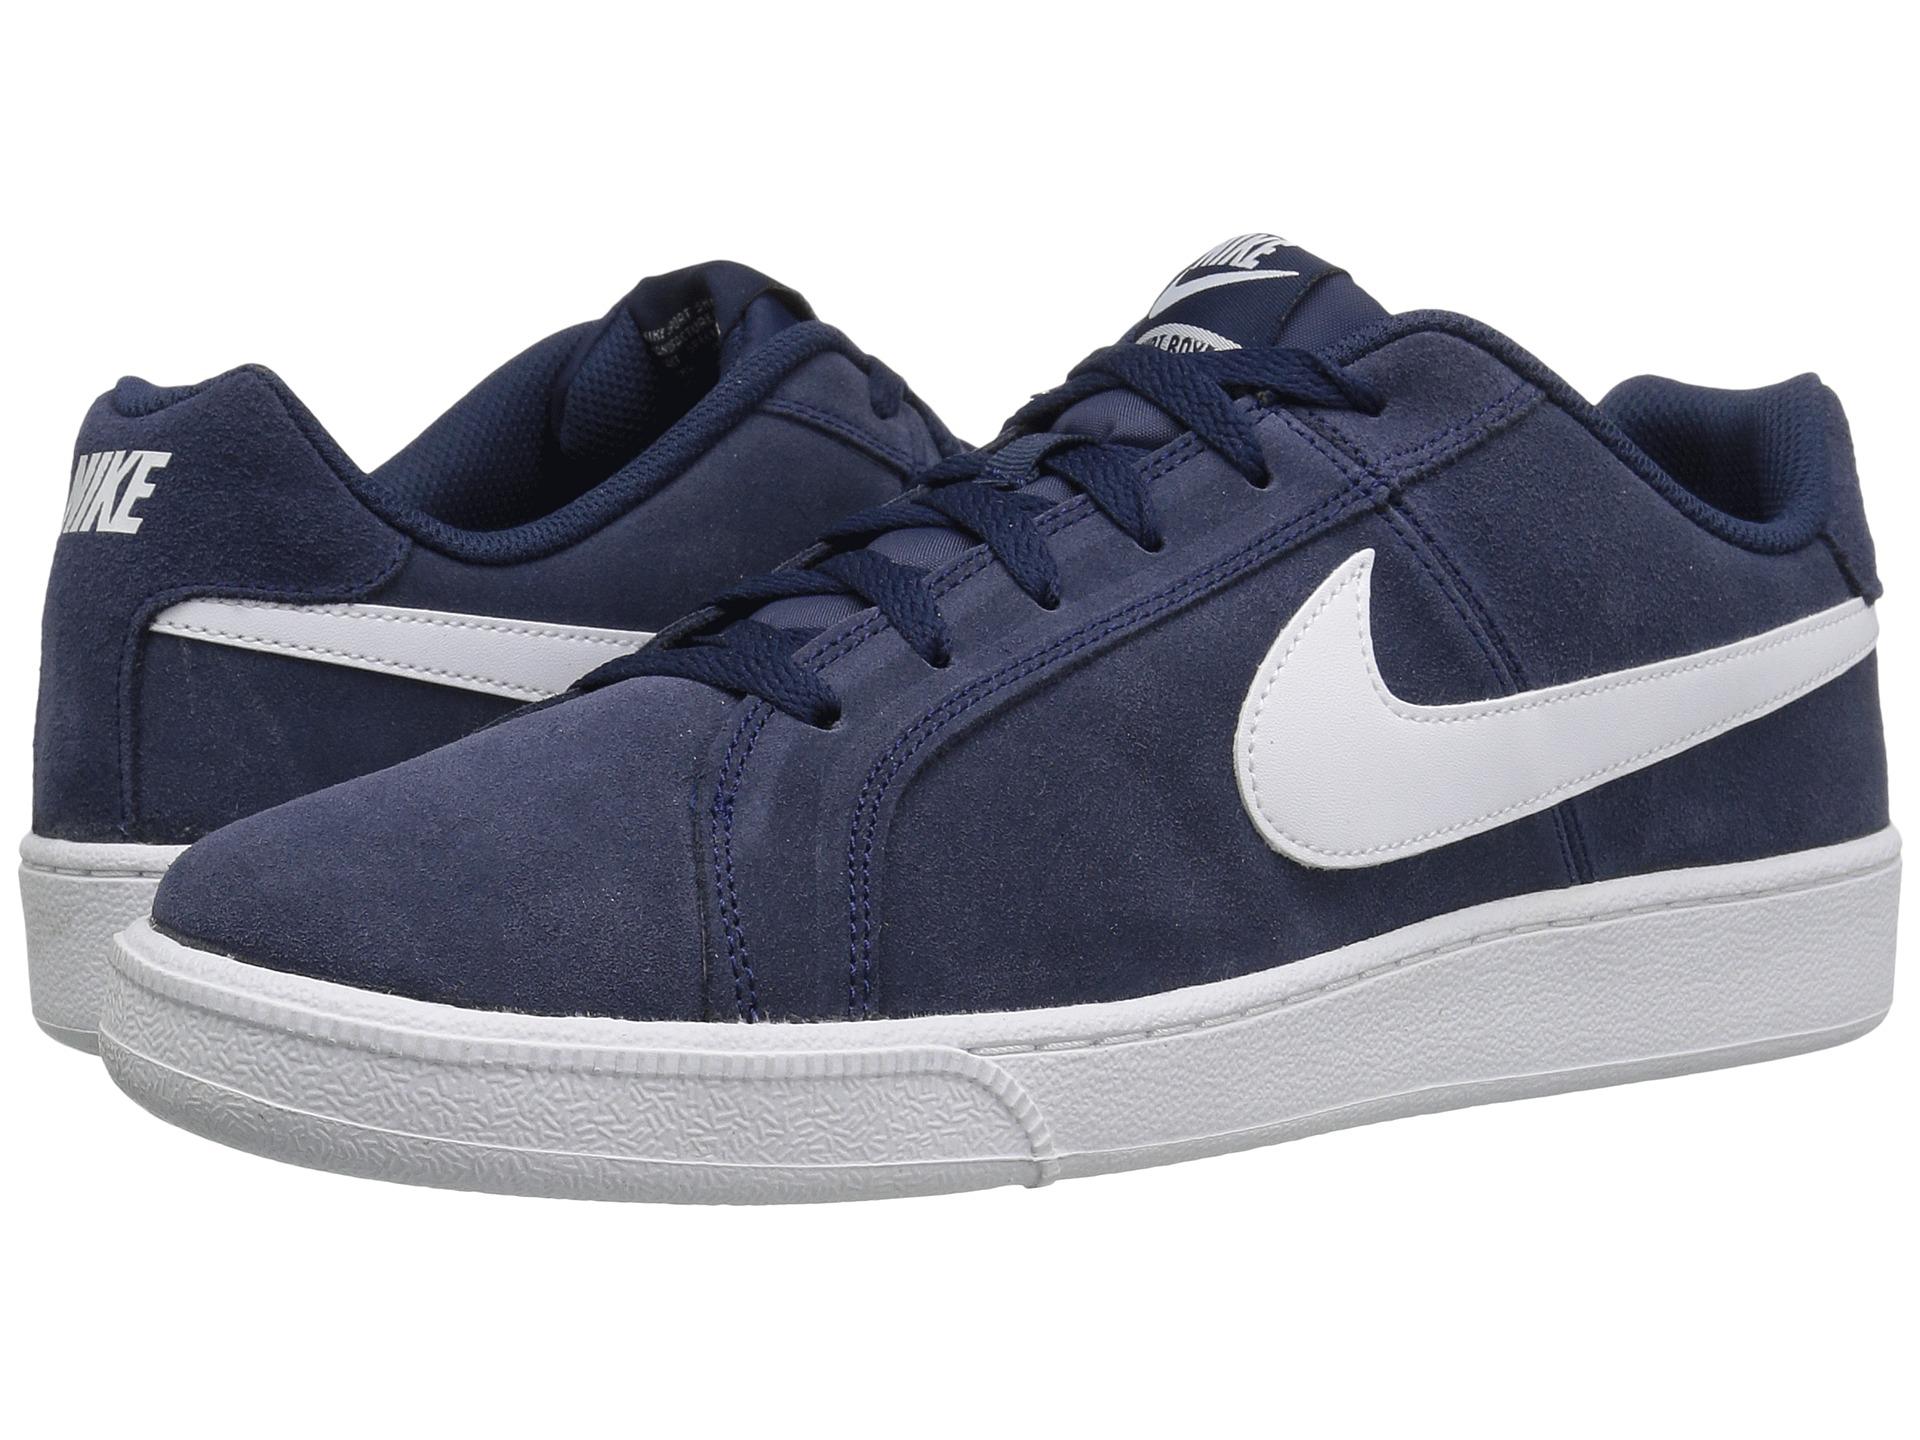 Tenis Nike Court Royale Azul Sale Discounted, 49% OFF | himlamcorp.vn